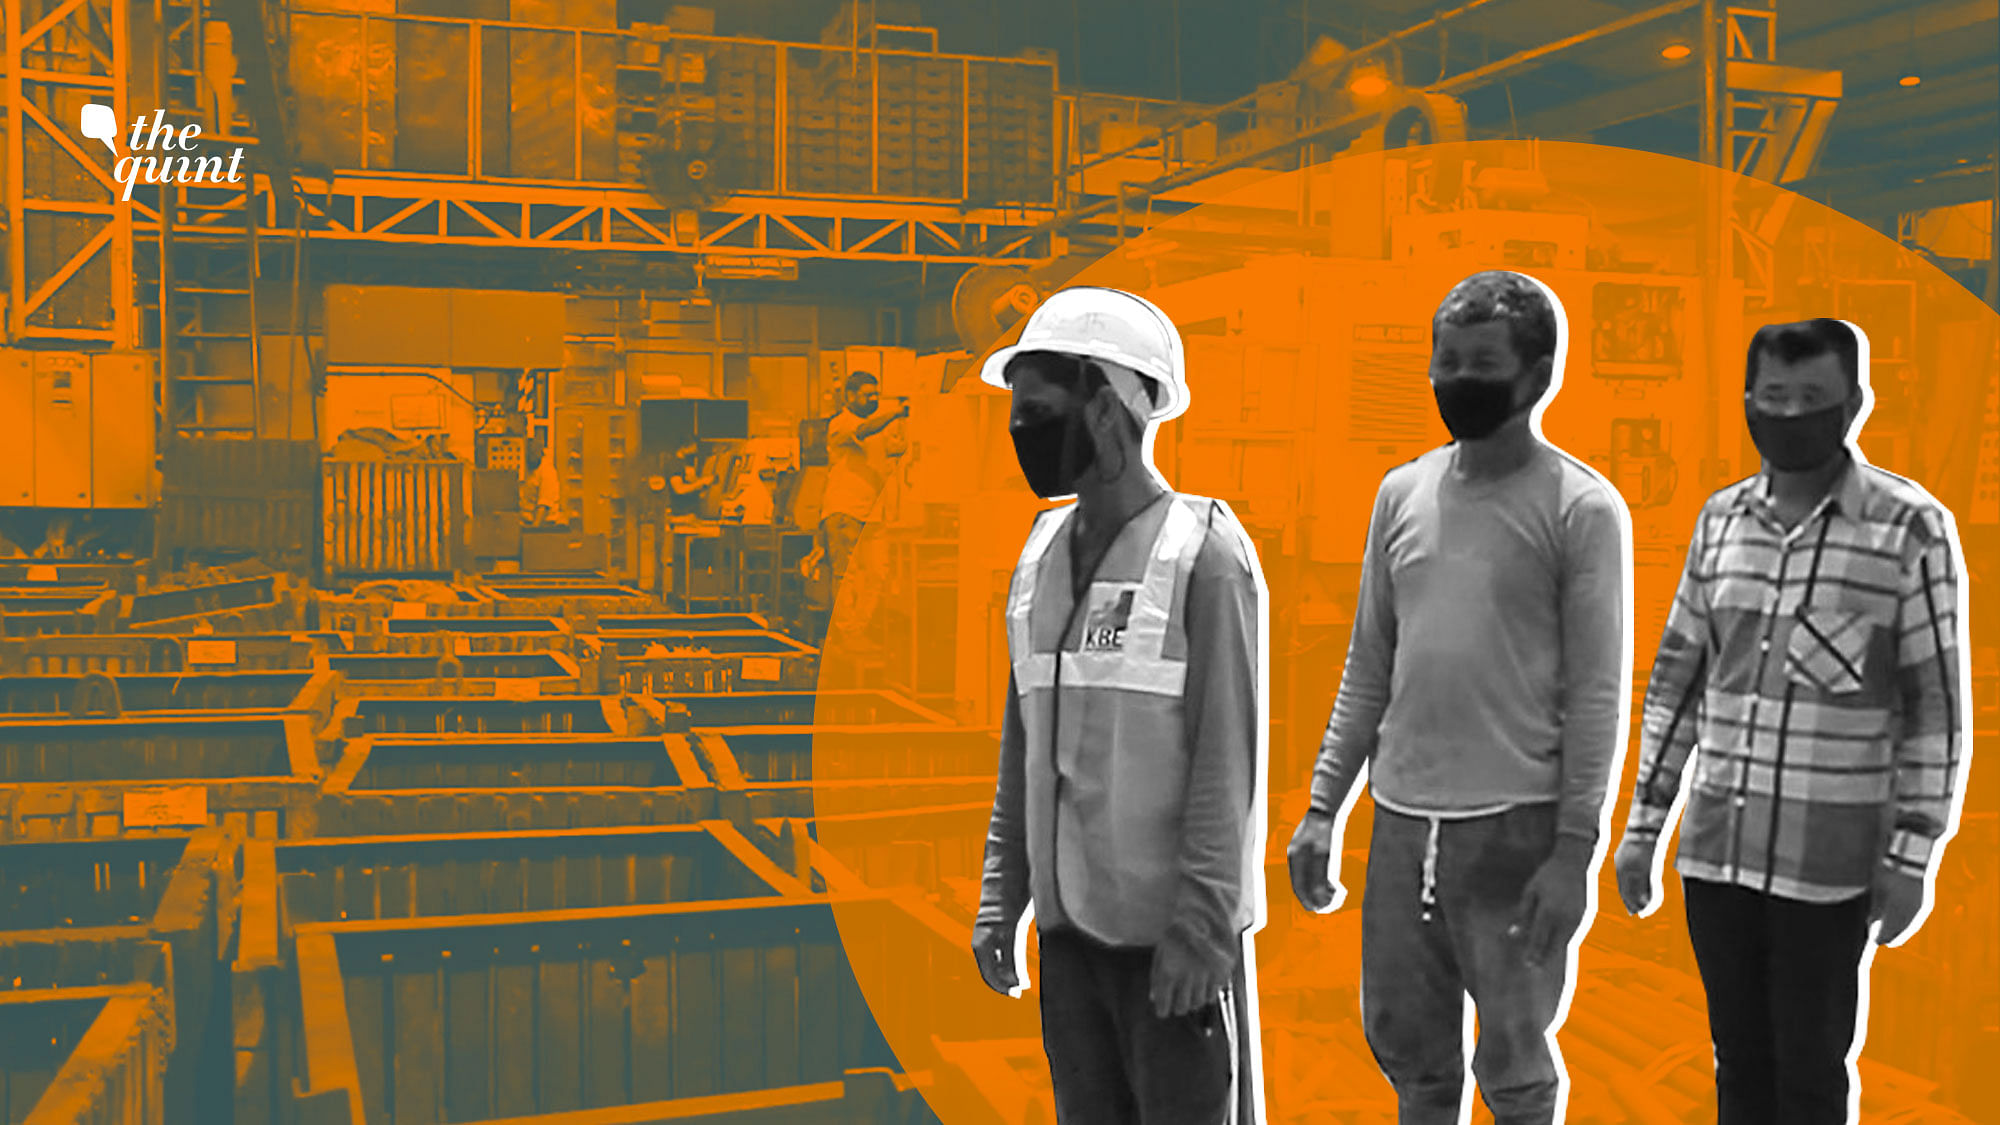 Industries in Ludhiana were able to retain their workforce amid the lockdown.